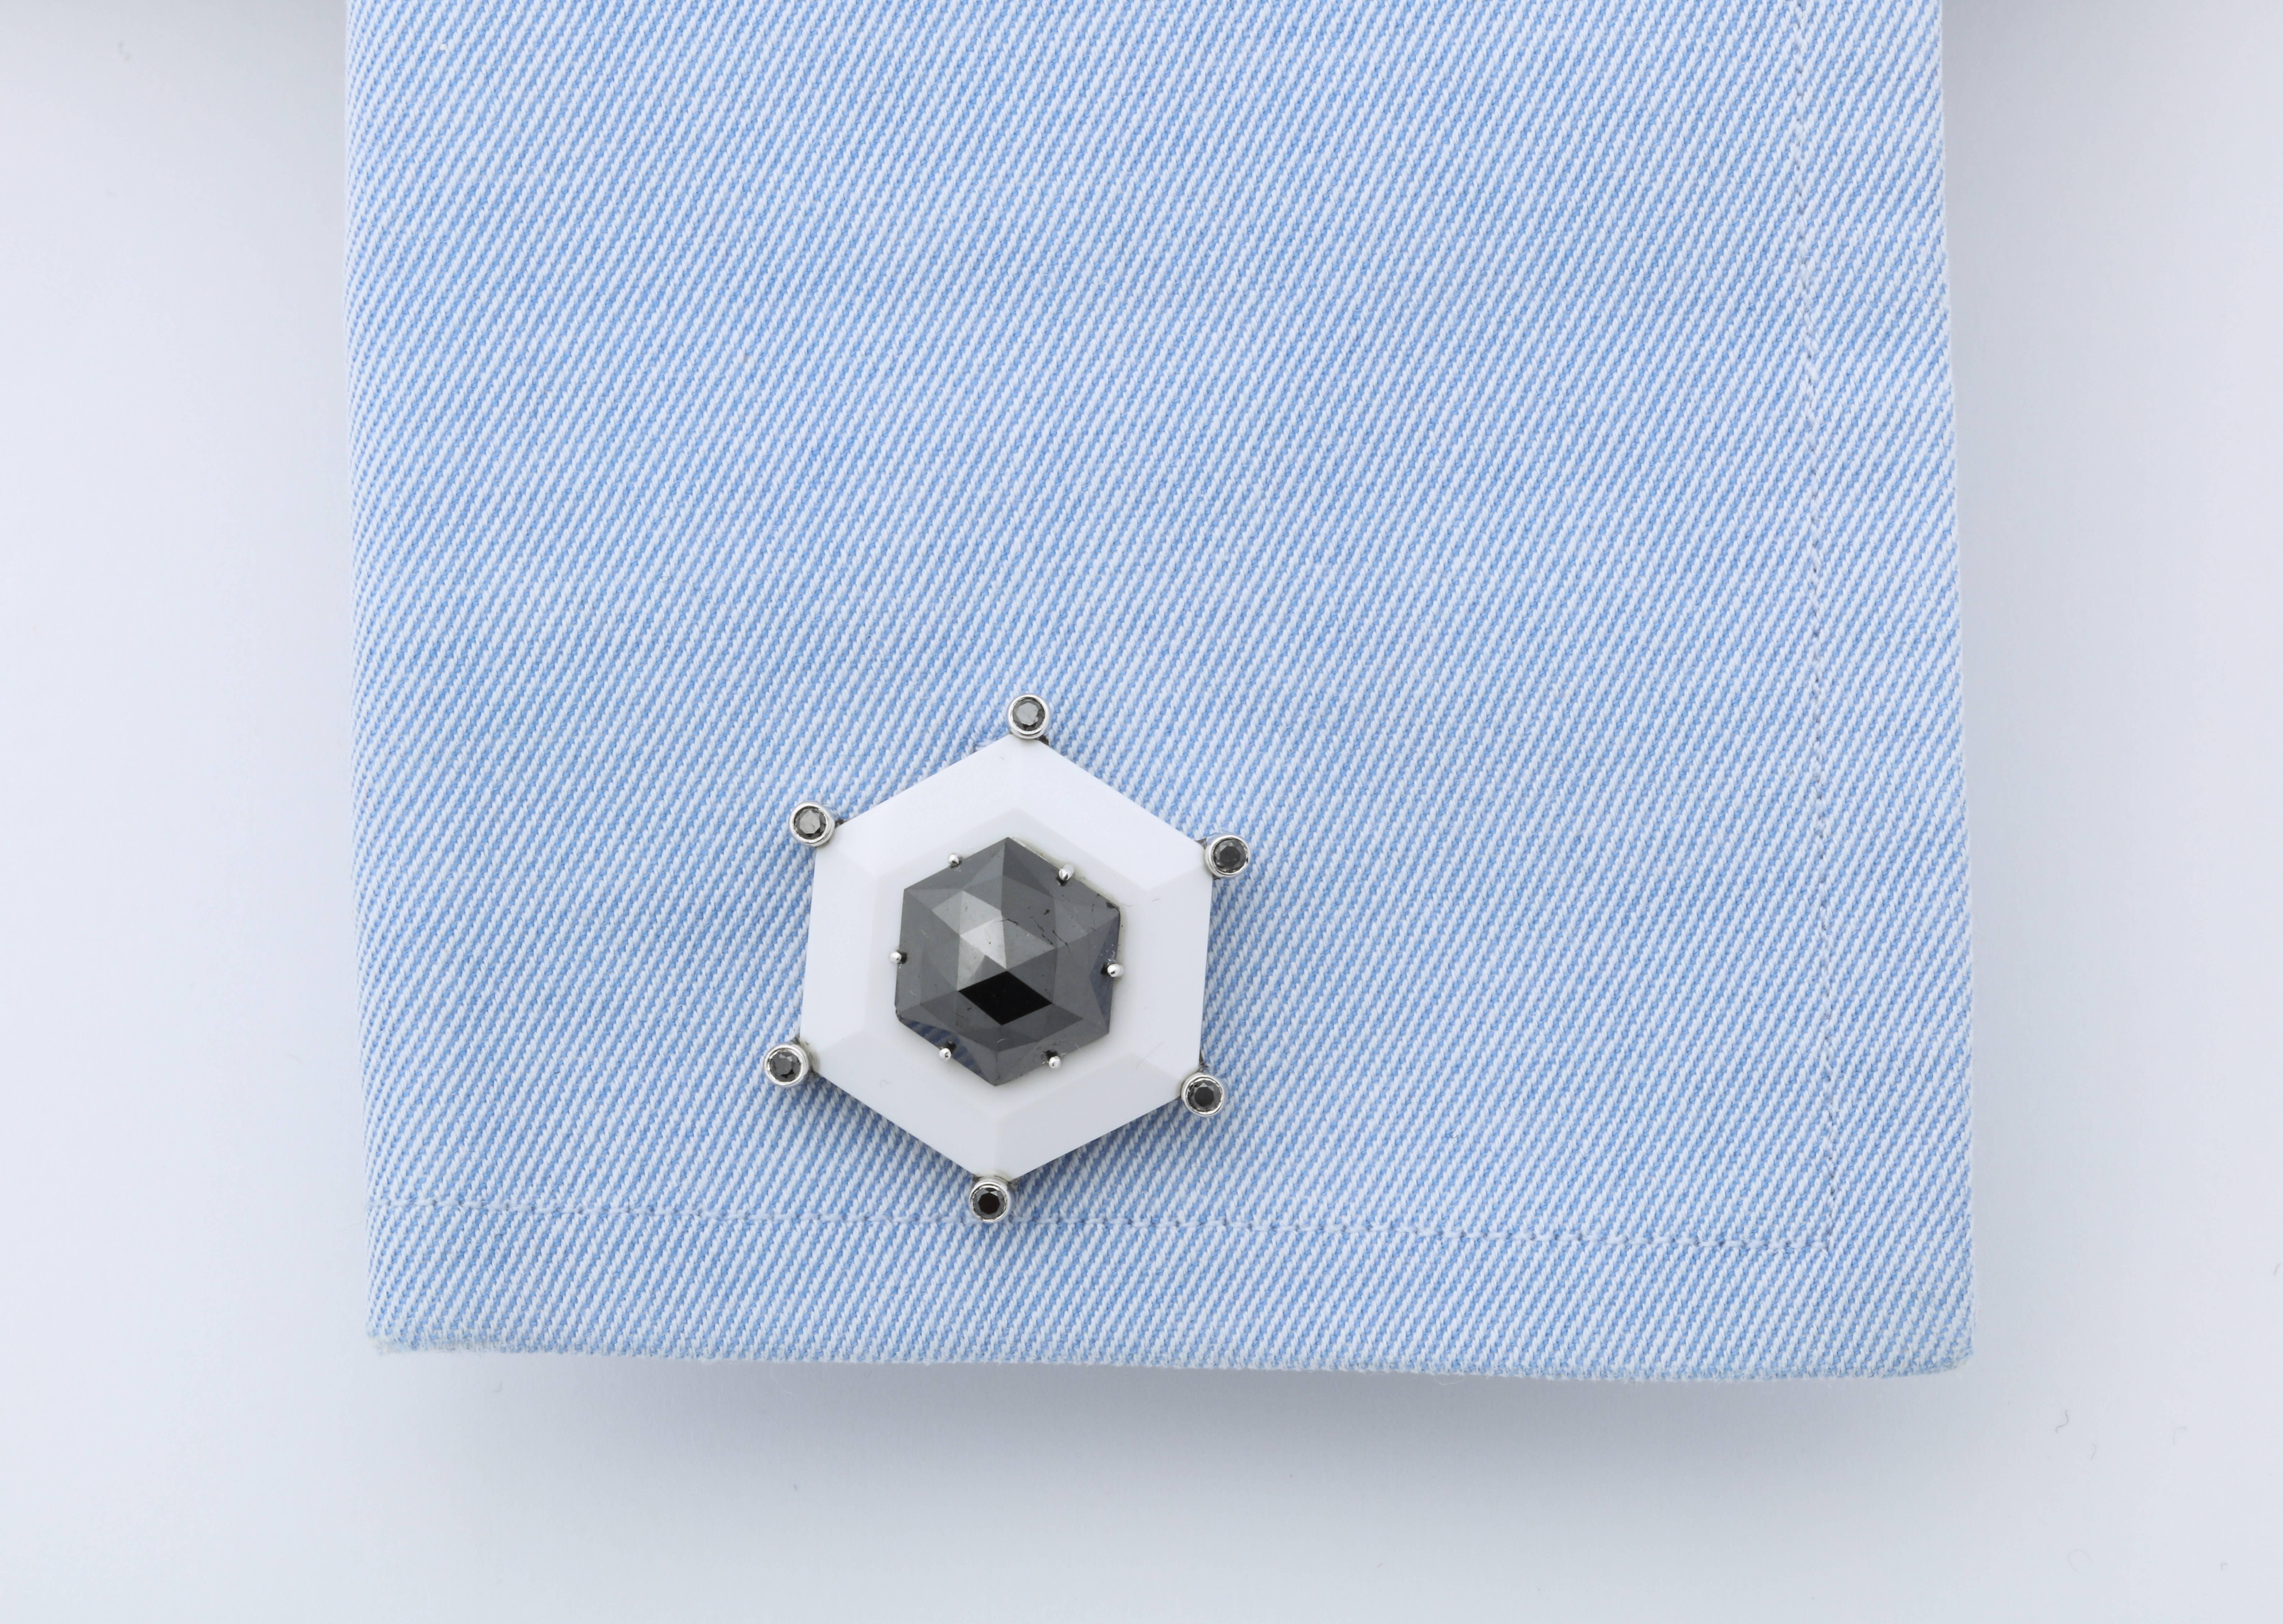 These completely bespoke cufflinks feature custom cut hexagonal black diamonds (2.96cts & 2.60cts) centrally set above white agate framed with bezel set round black diamonds.  The back of the cufflinks are  set with another pair of hexagonal black